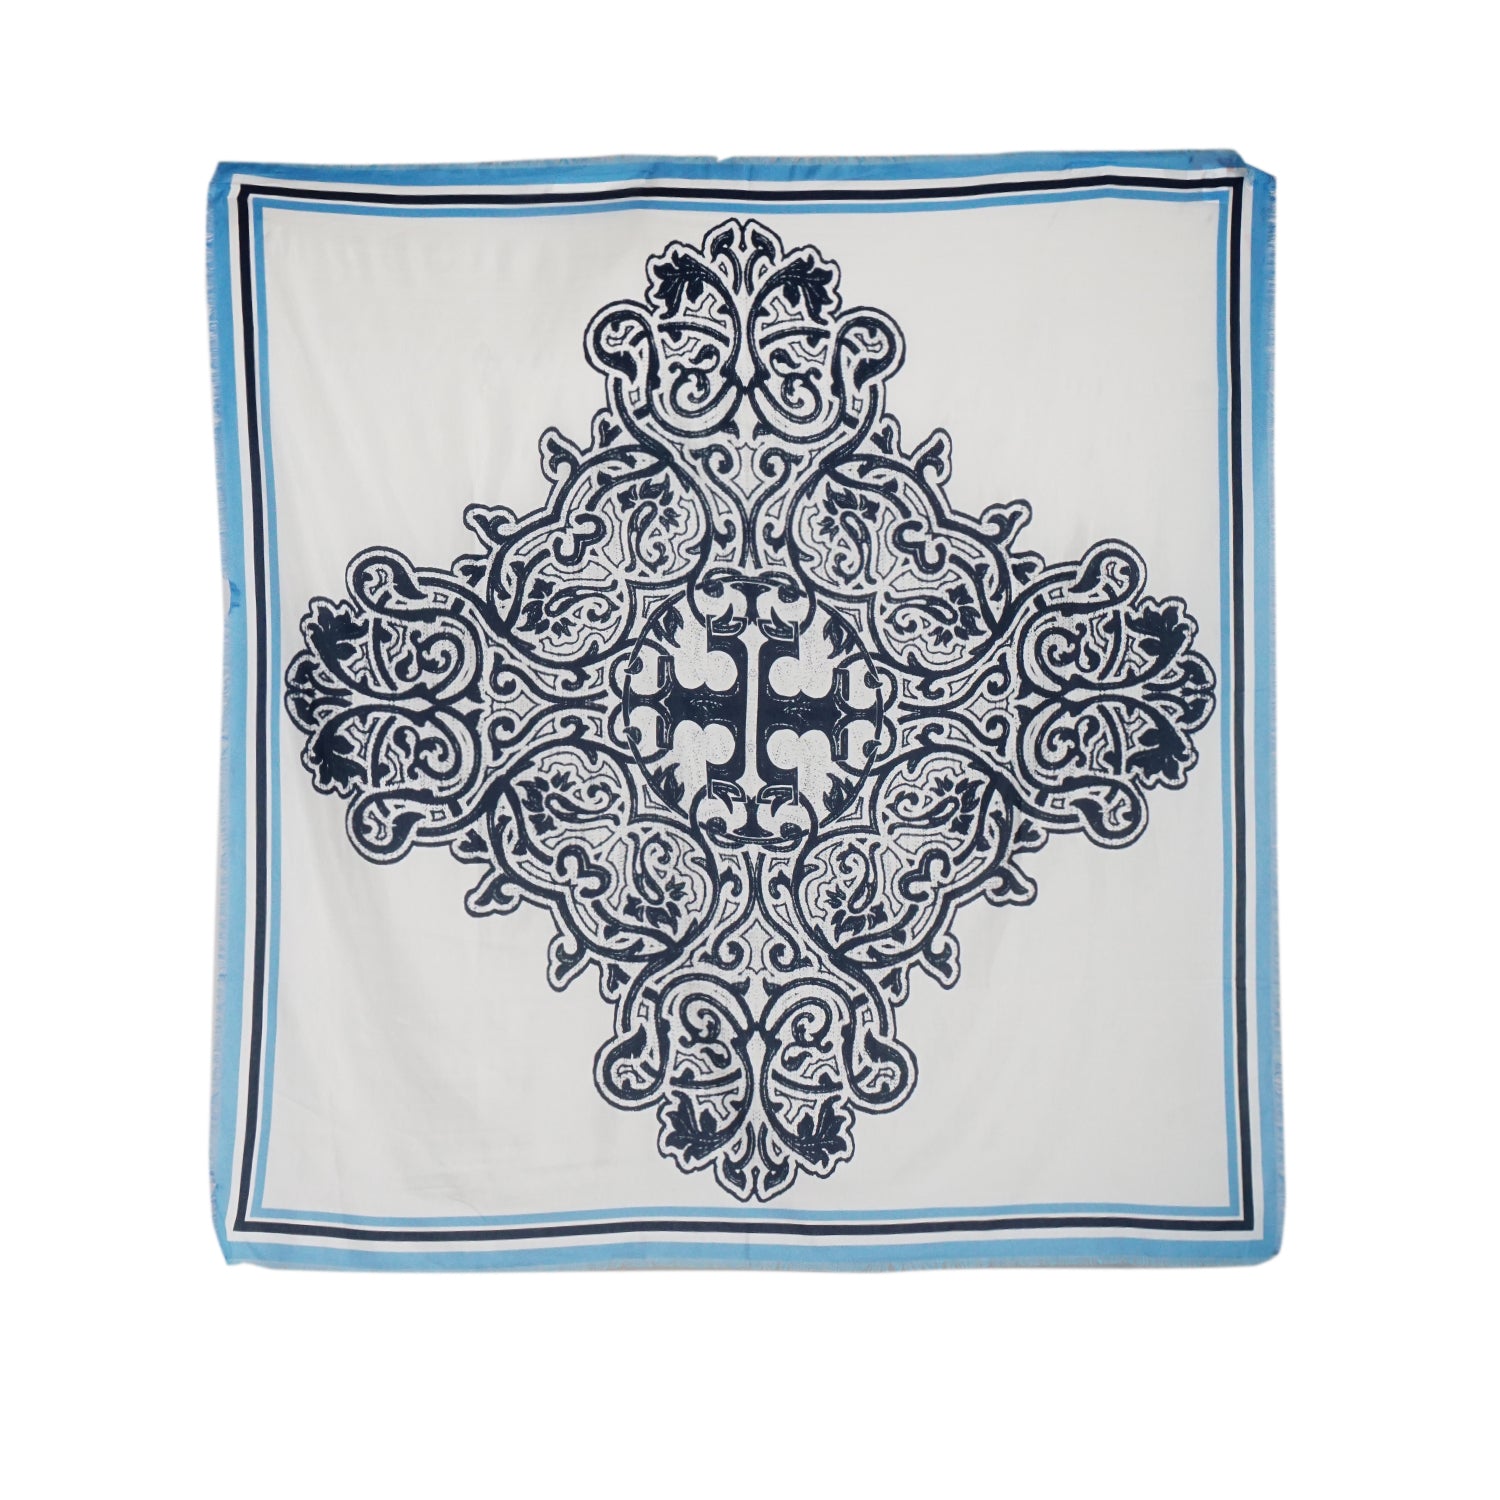 TORY BURCH PRINTED LOGO OVER-SIZED SQUARE SCARF IN BLUE